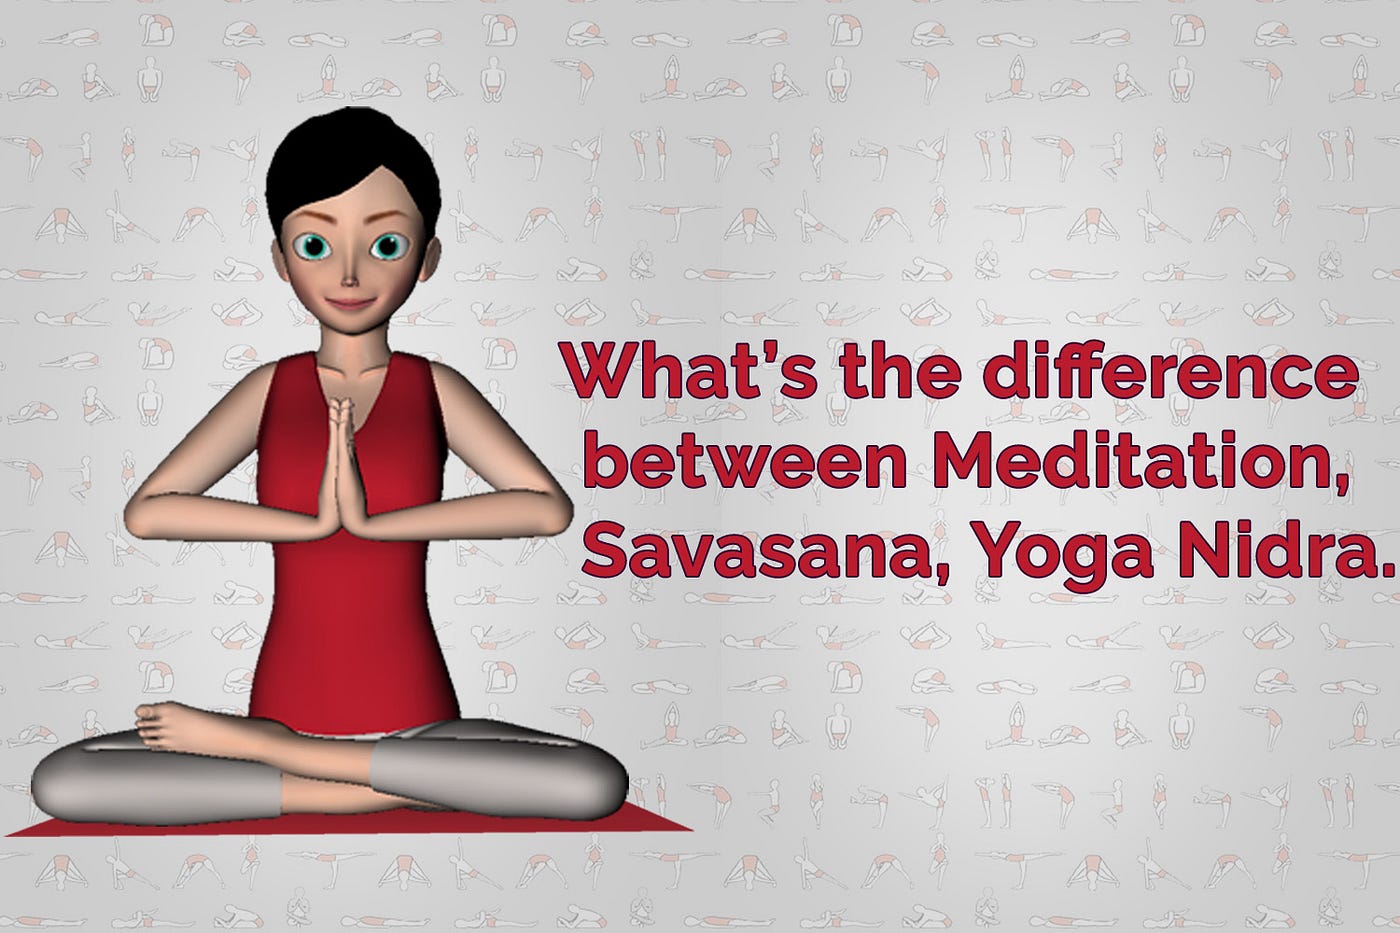 Yoga Vs Meditation: What's The Difference?